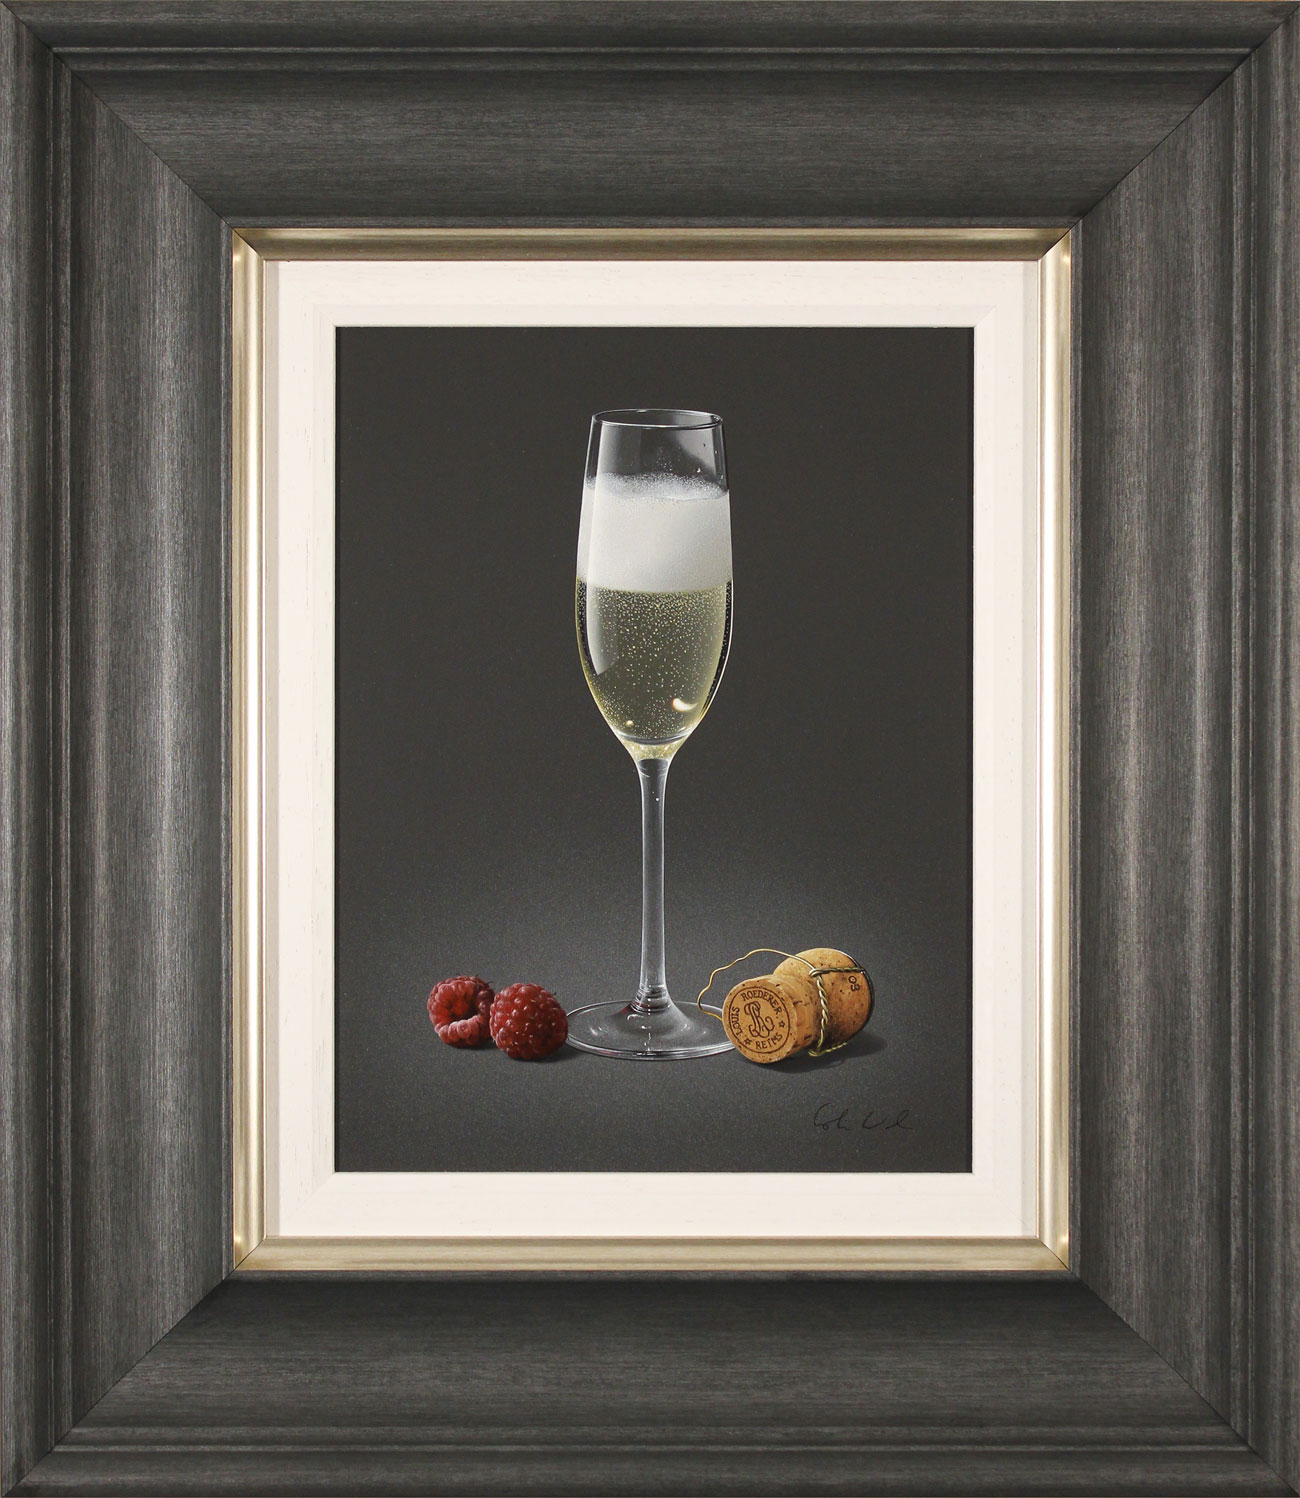 Colin Wilson, Original acrylic painting on board, Champagne and Raspberries. Click to enlarge